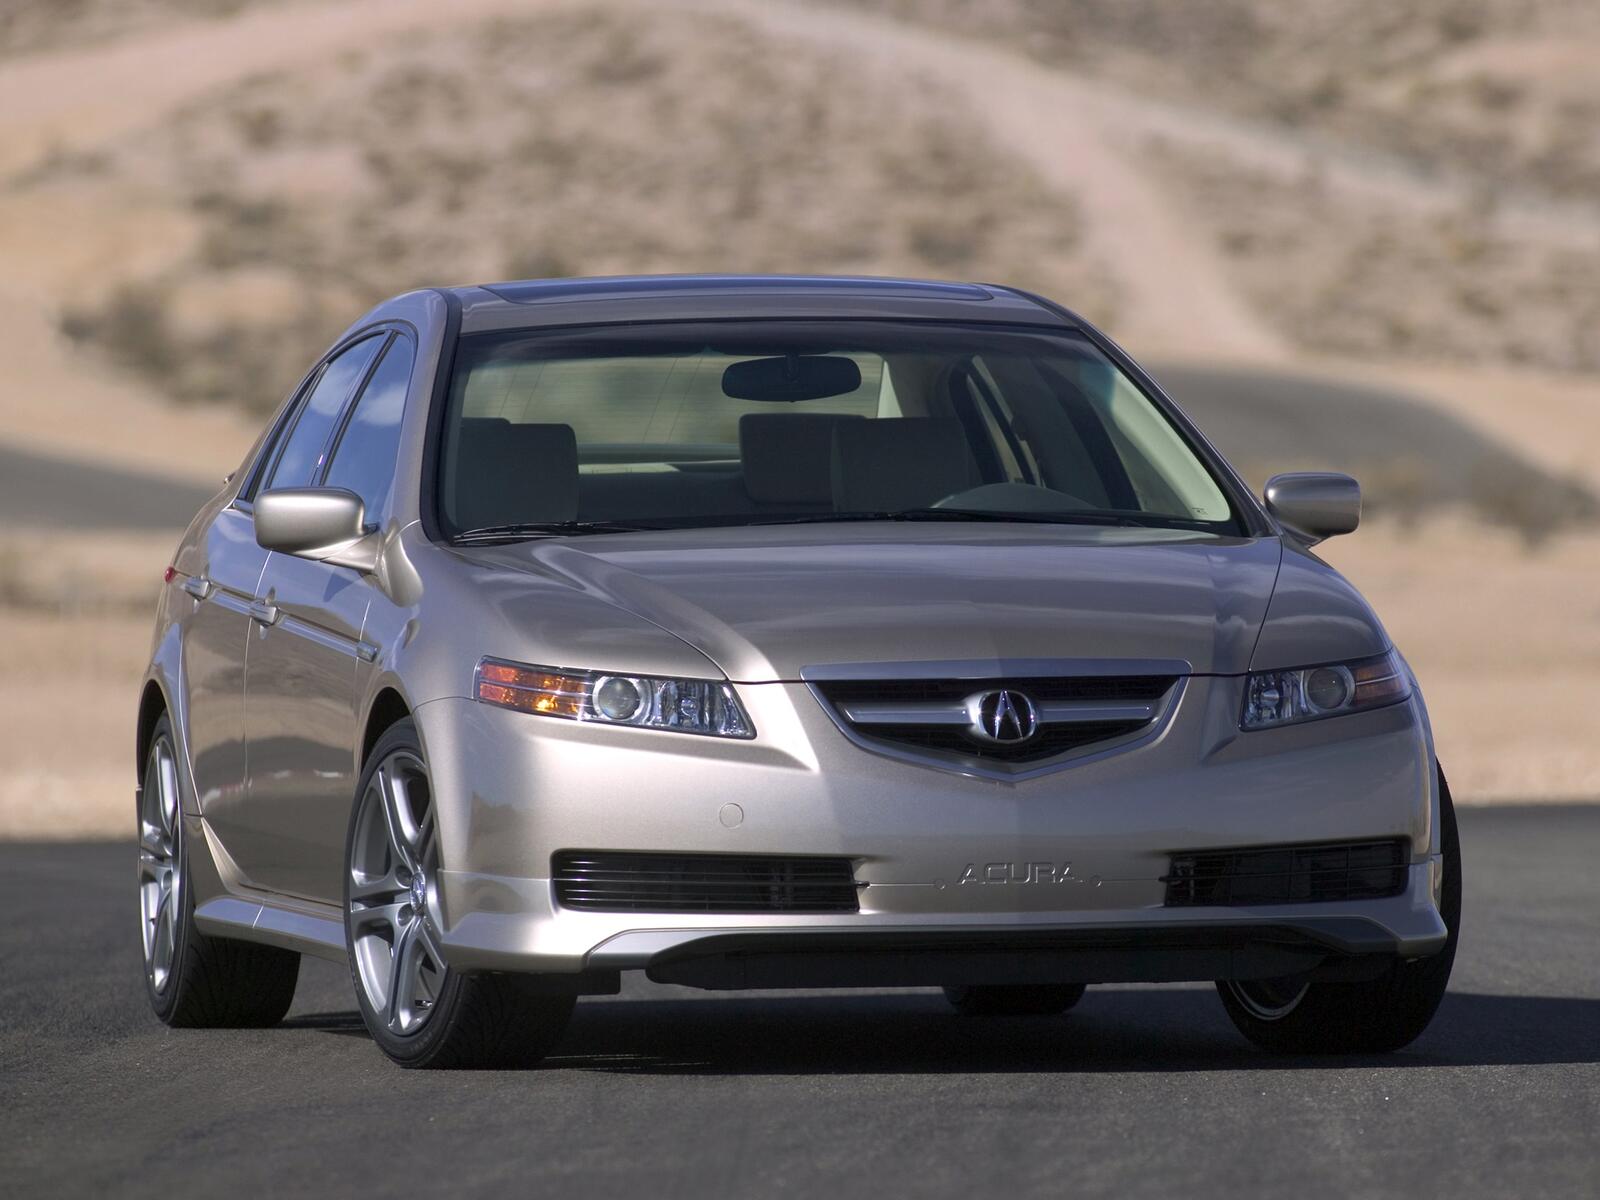 Wallpapers Acura tl 2004 on the desktop